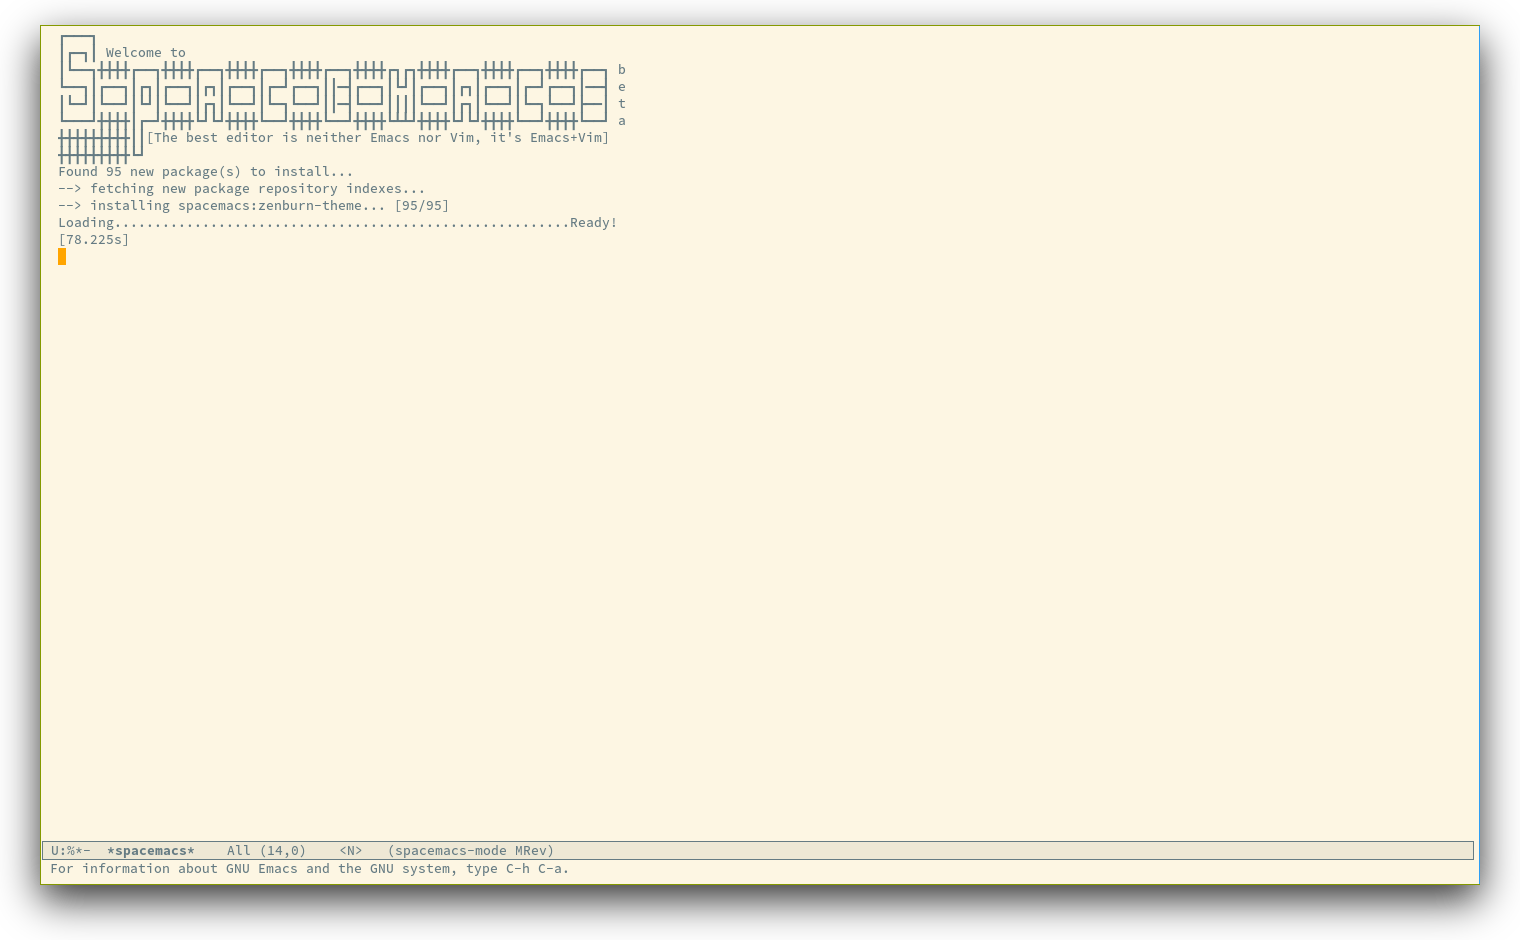 /TakeV/spacemacs/media/commit/9726033515051b4fcba1ca53af4fa4aad8b1a254/doc/img/spacemacs-startup.png